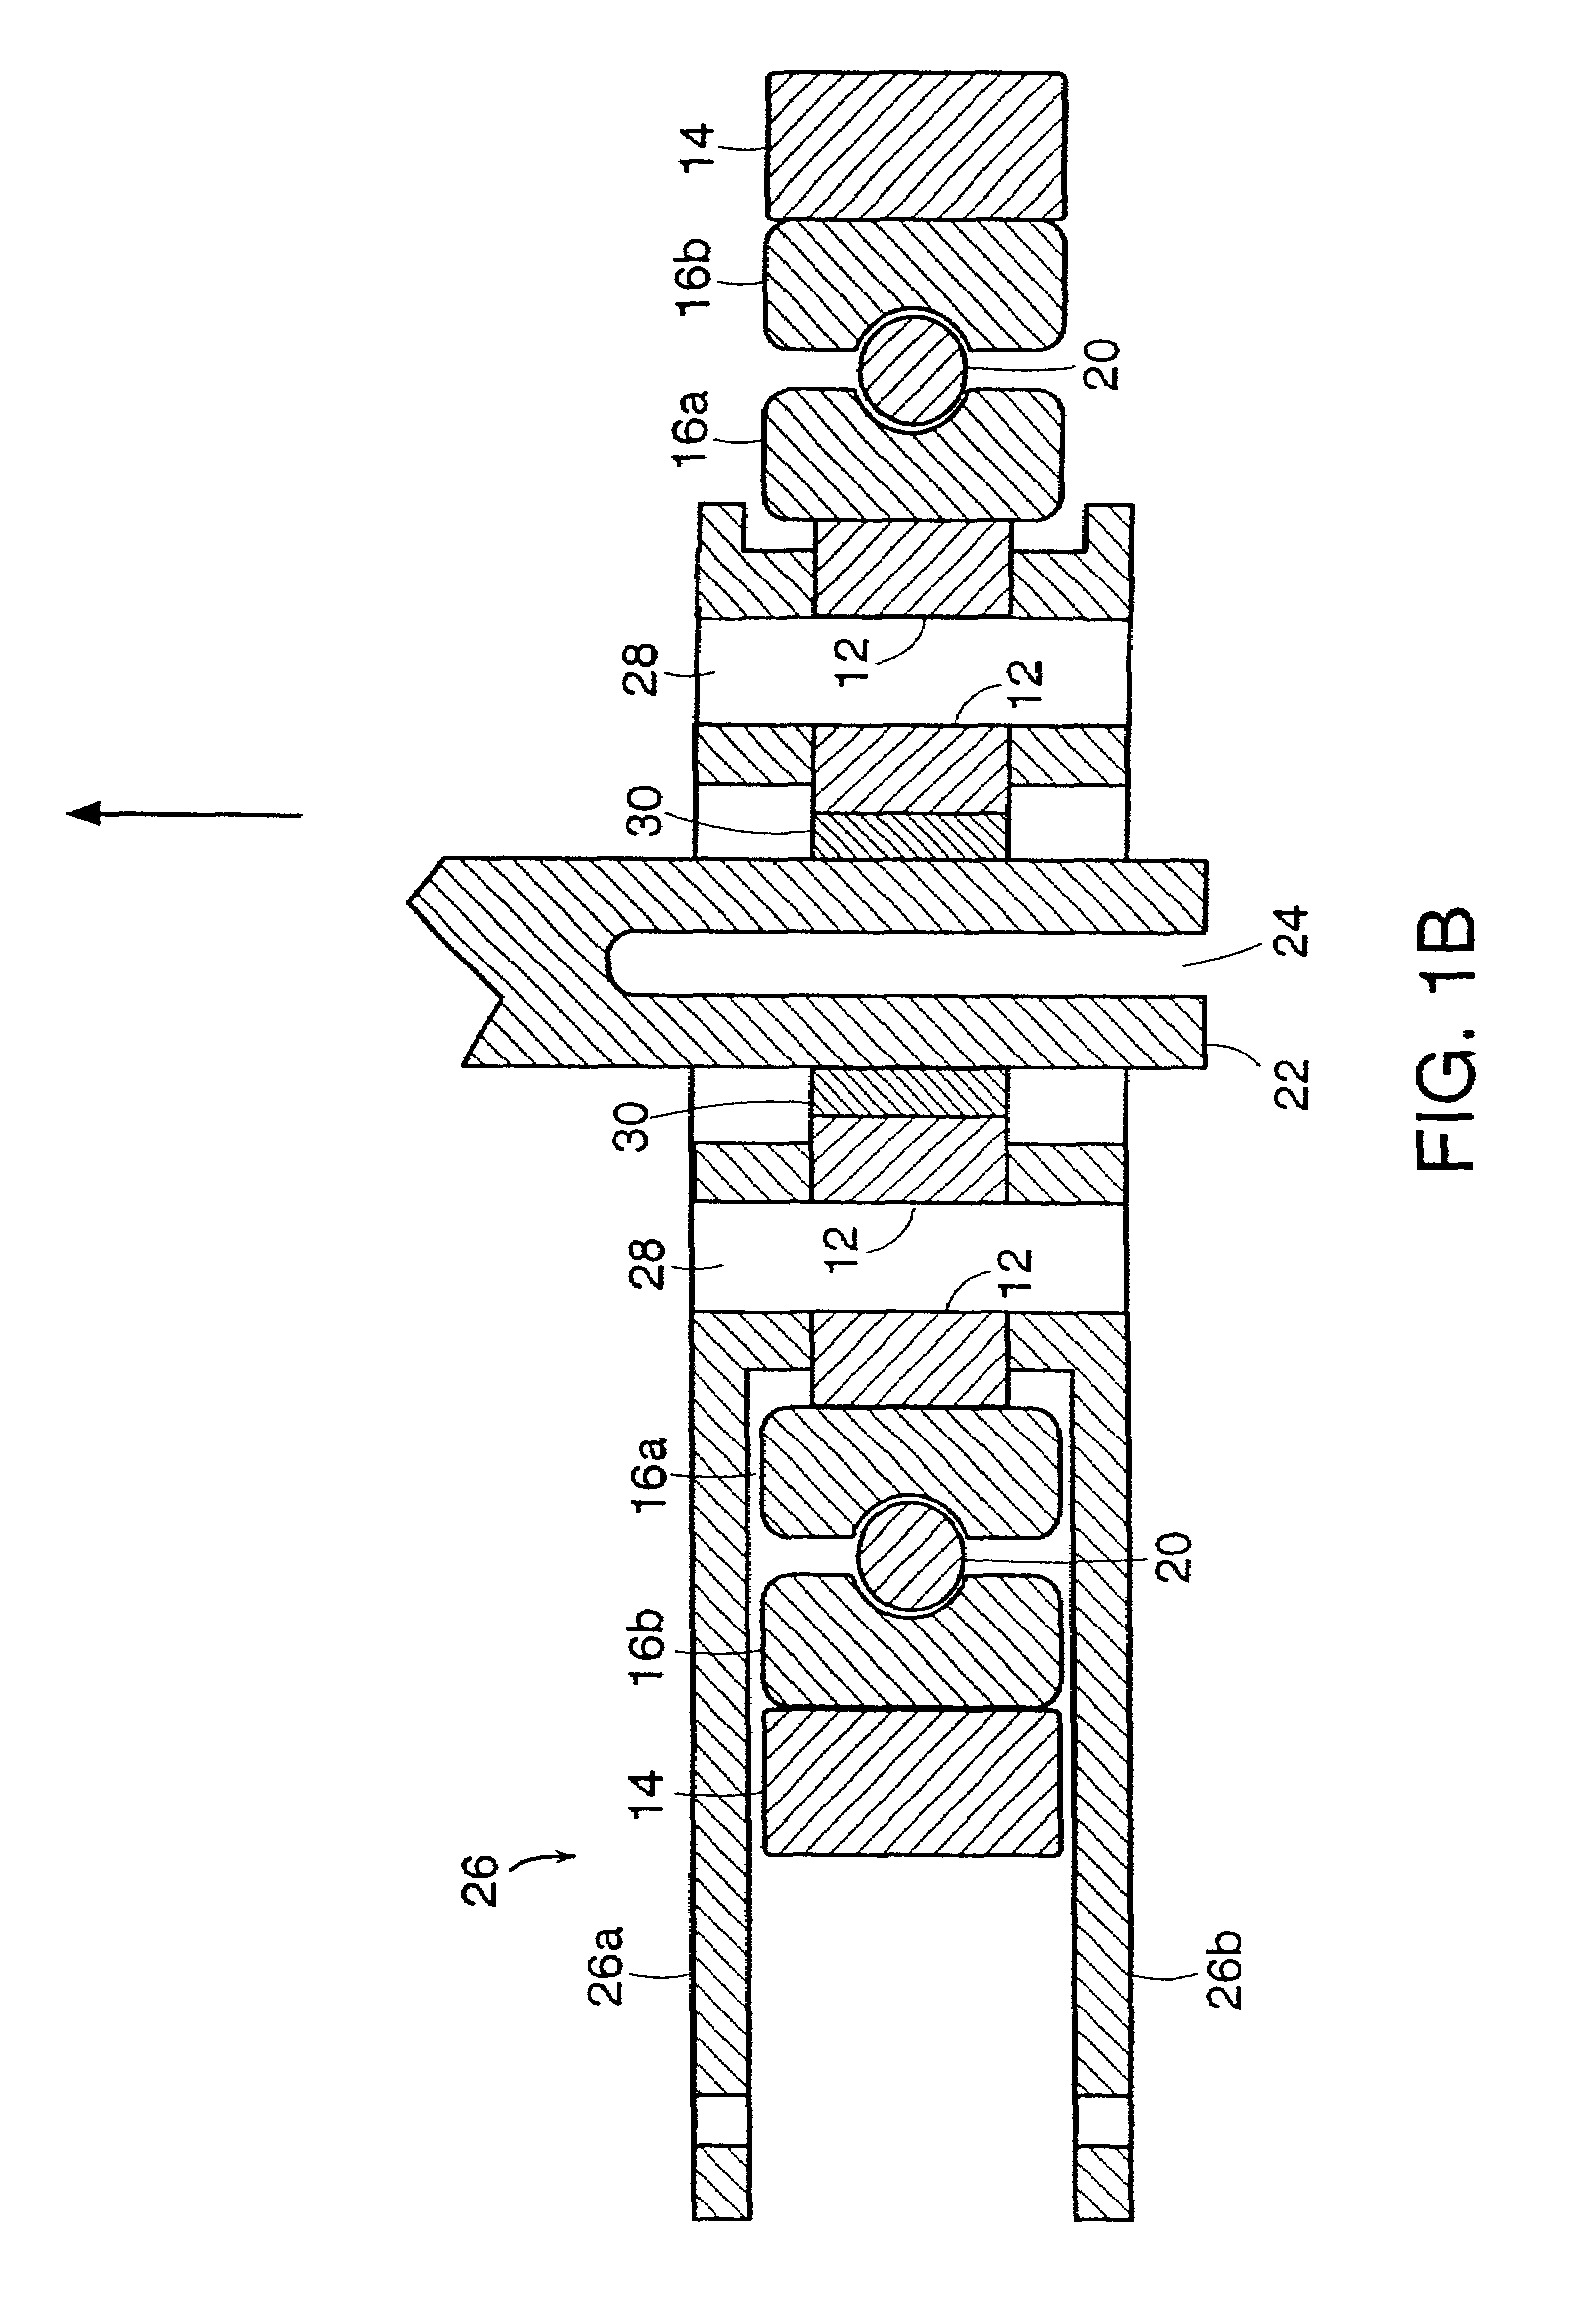 Tribological materials and structures and methods for making the same